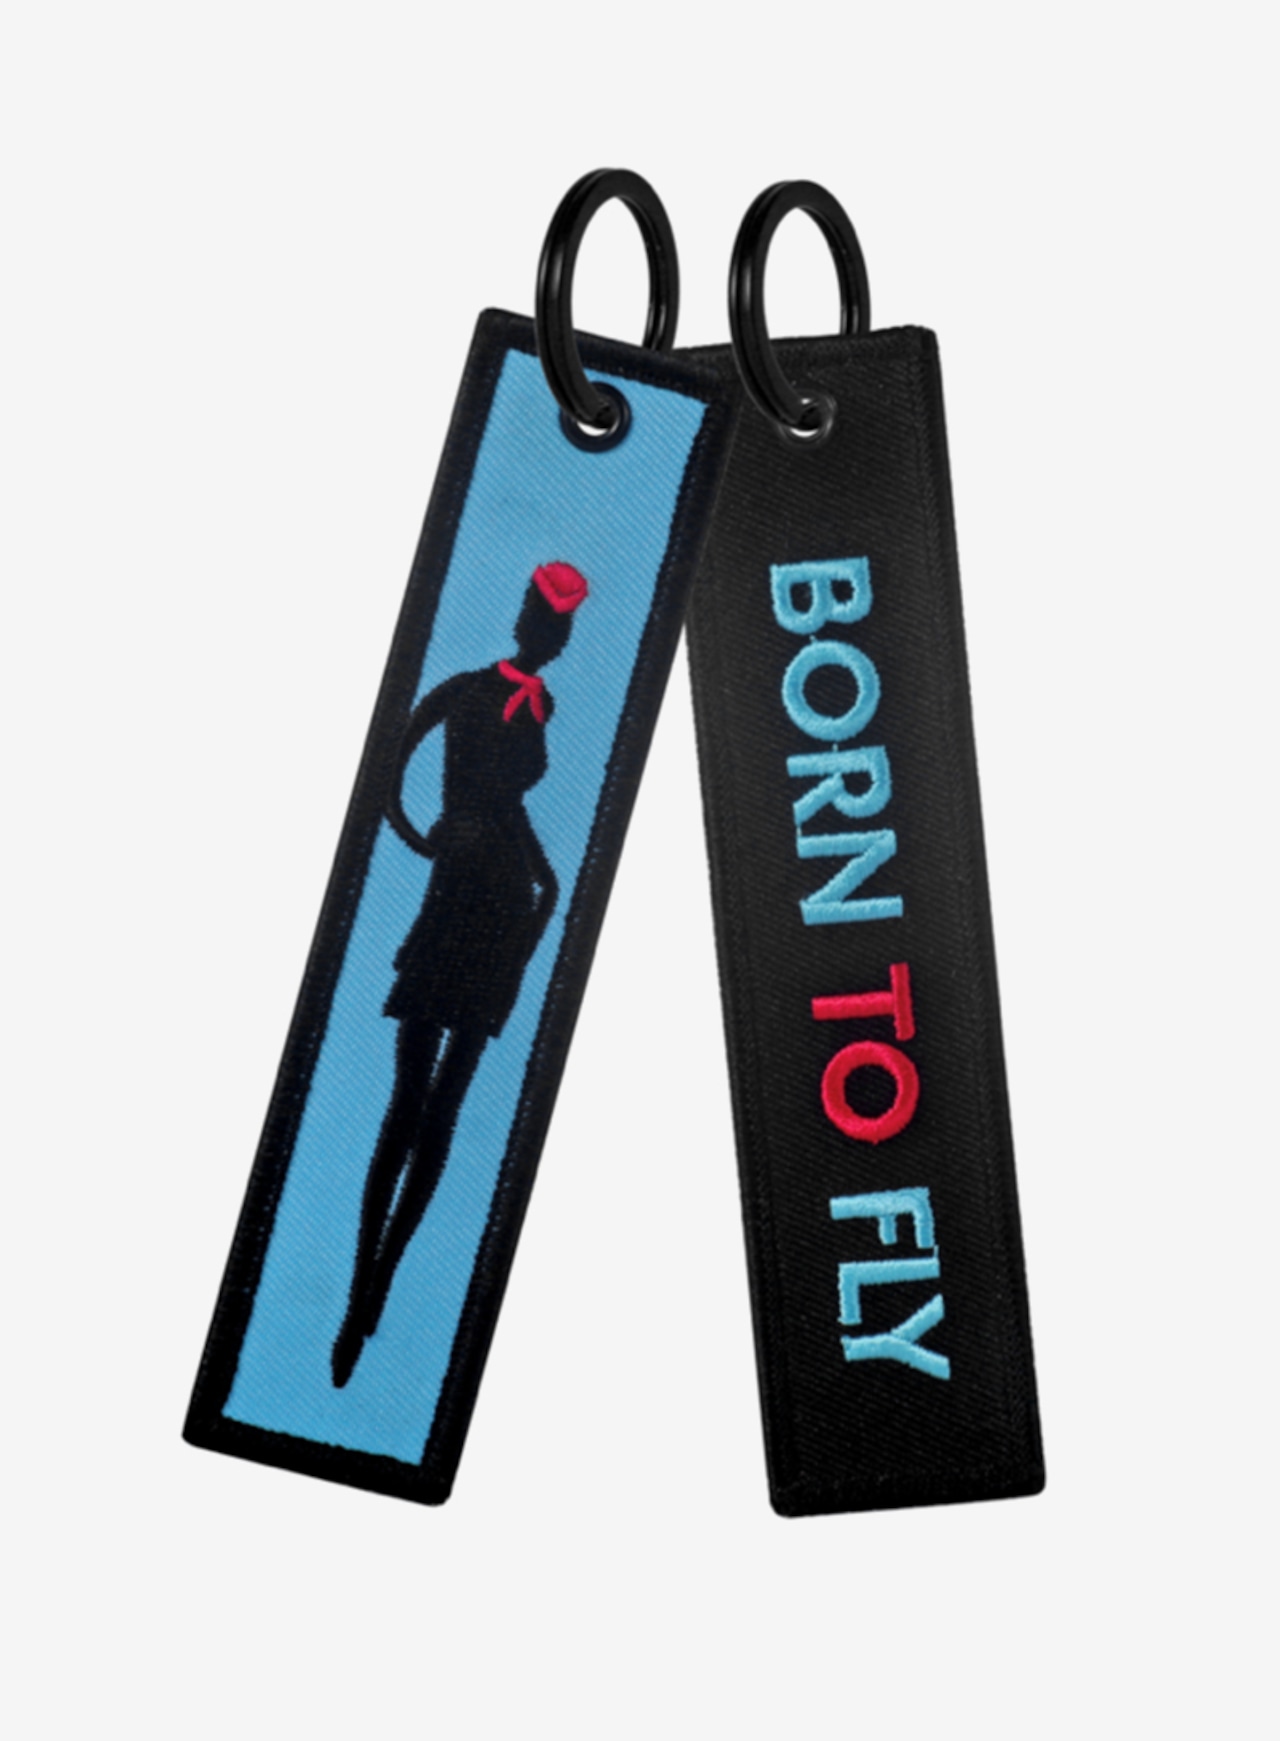 Bag Tag Keychain「Born To Fly」